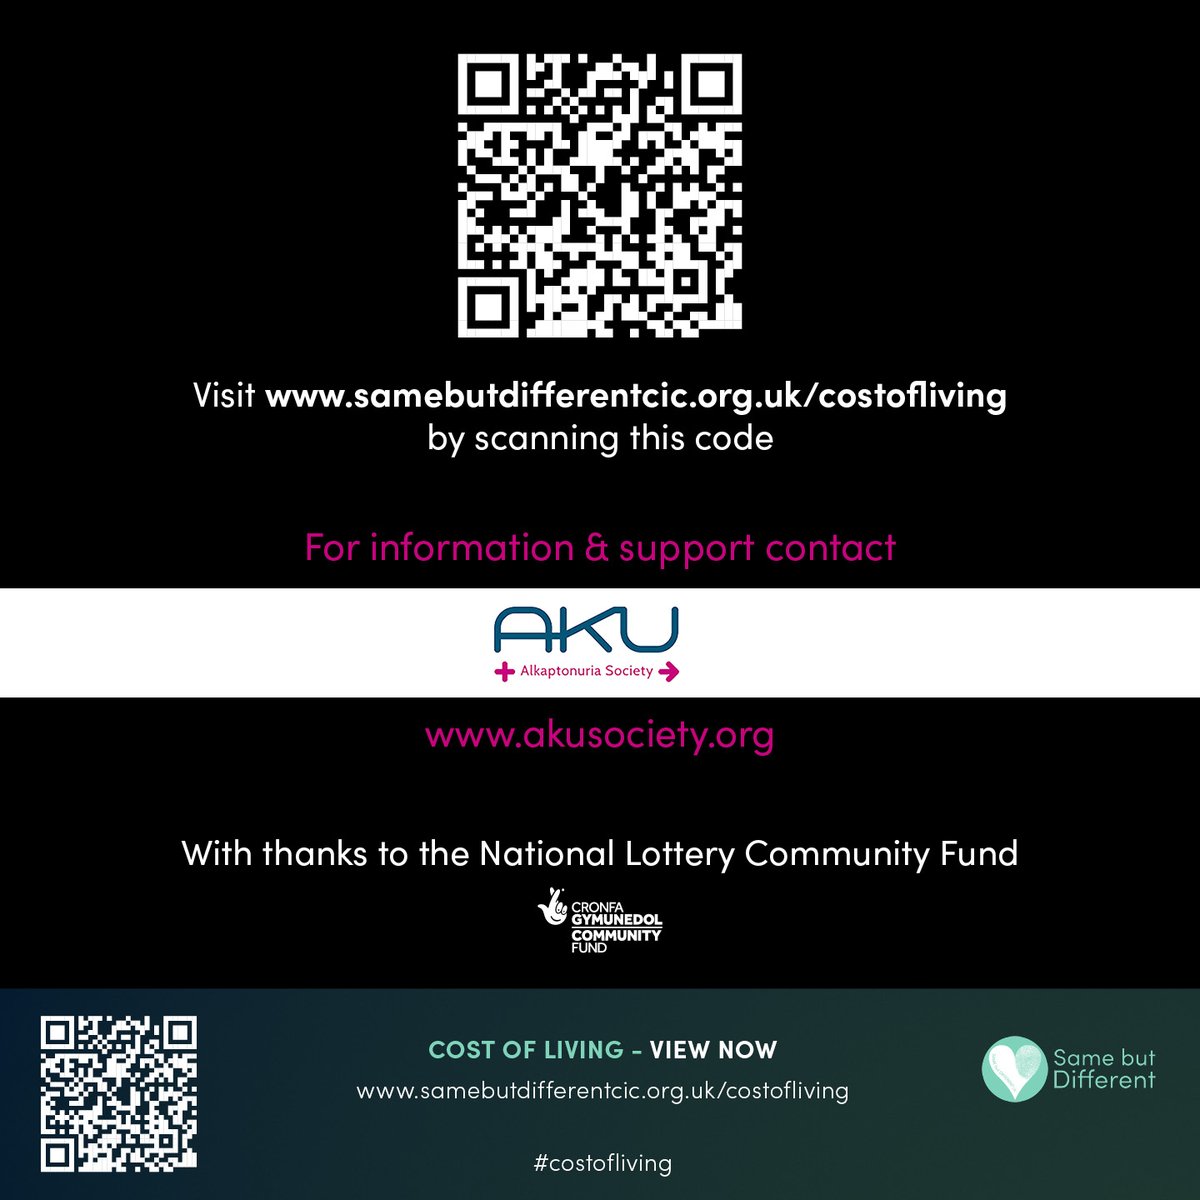 There are many people affected by #raredisease & #disabilities who are struggling with the #costoflivingcrisis, which is why, working alongside partners such as the @AKUSociety we’ve created a brand new info resource to help you at this challenging time: samebutdifferentcic.org.uk/costofliving